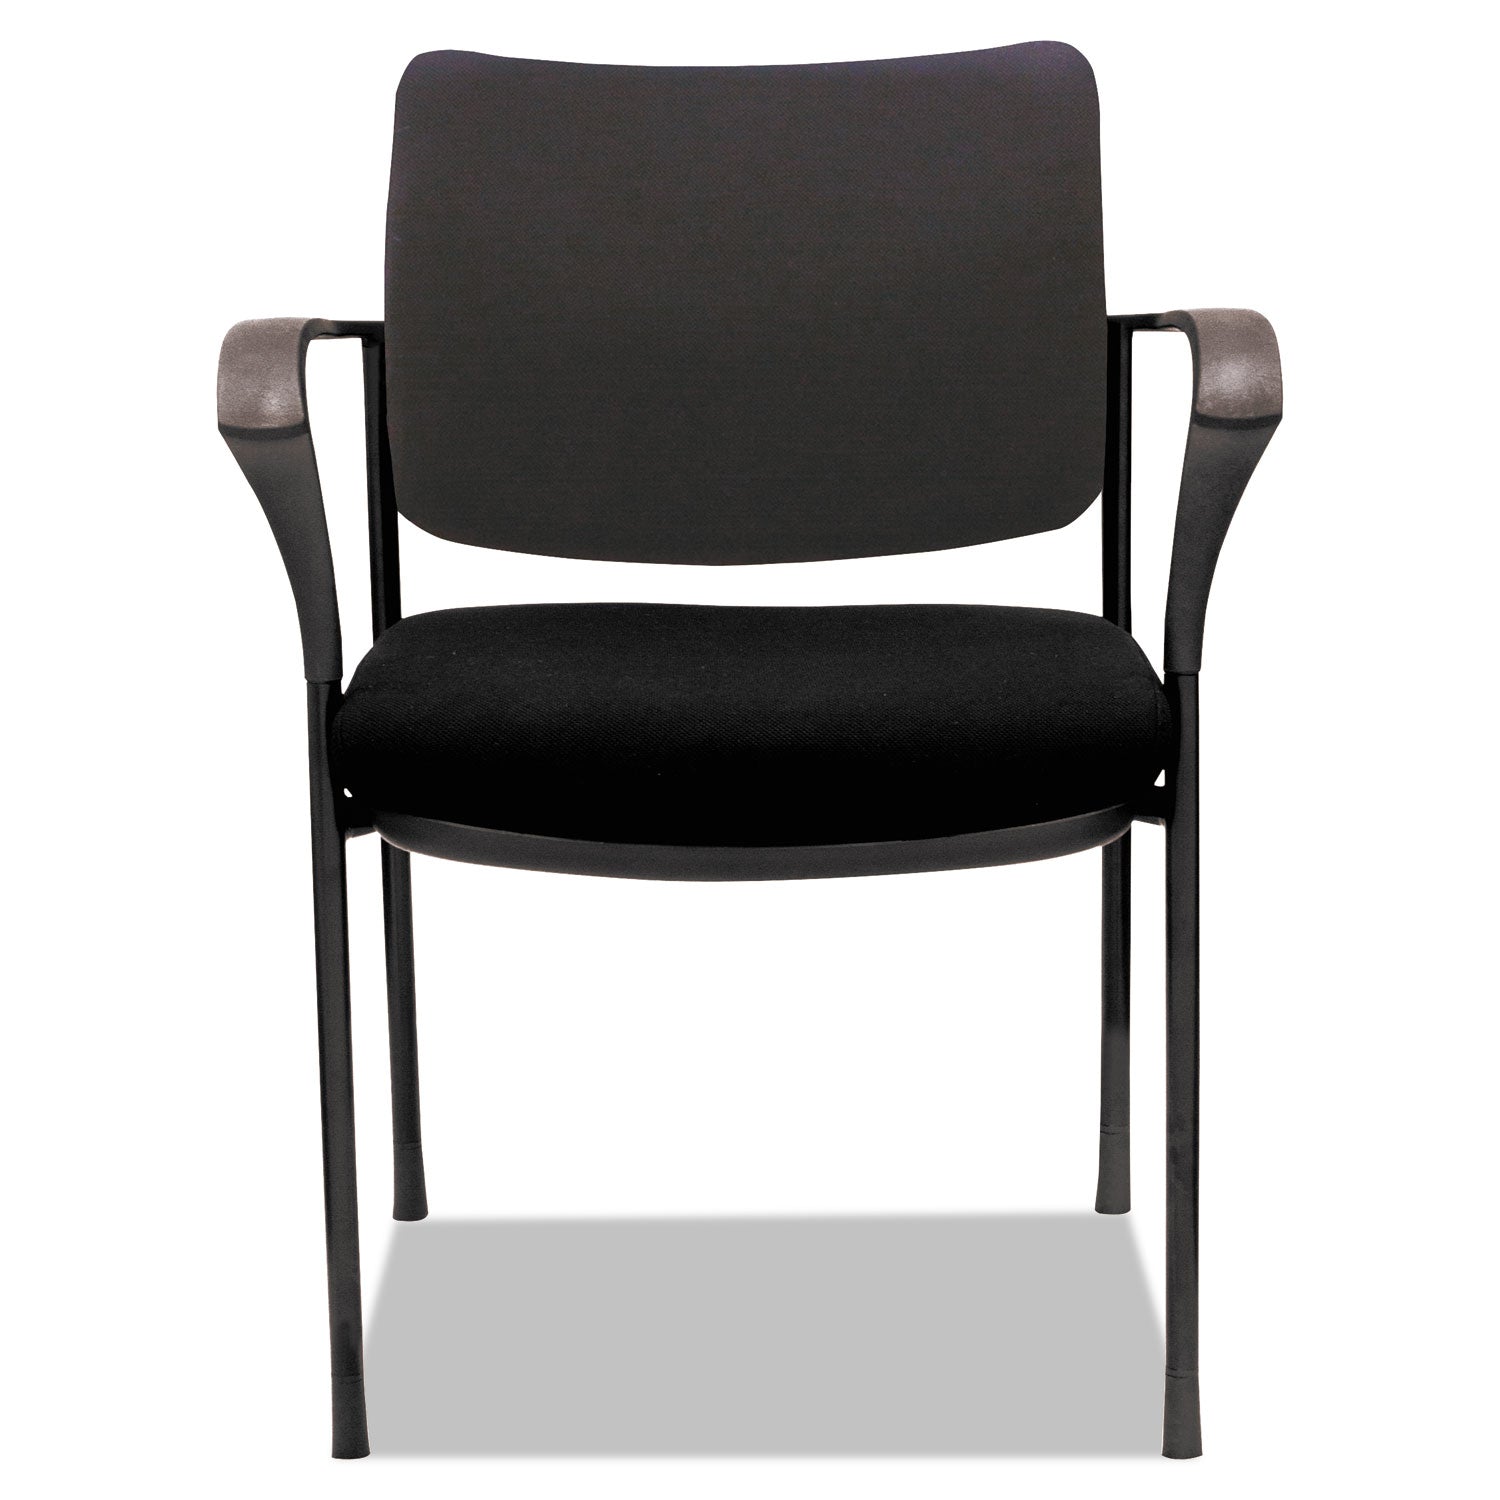 alera-iv-series-fabric-back-seat-guest-chairs-248-x-2283-x-3228-black-seat-black-back-black-base-2-carton_aleiv4317a - 2